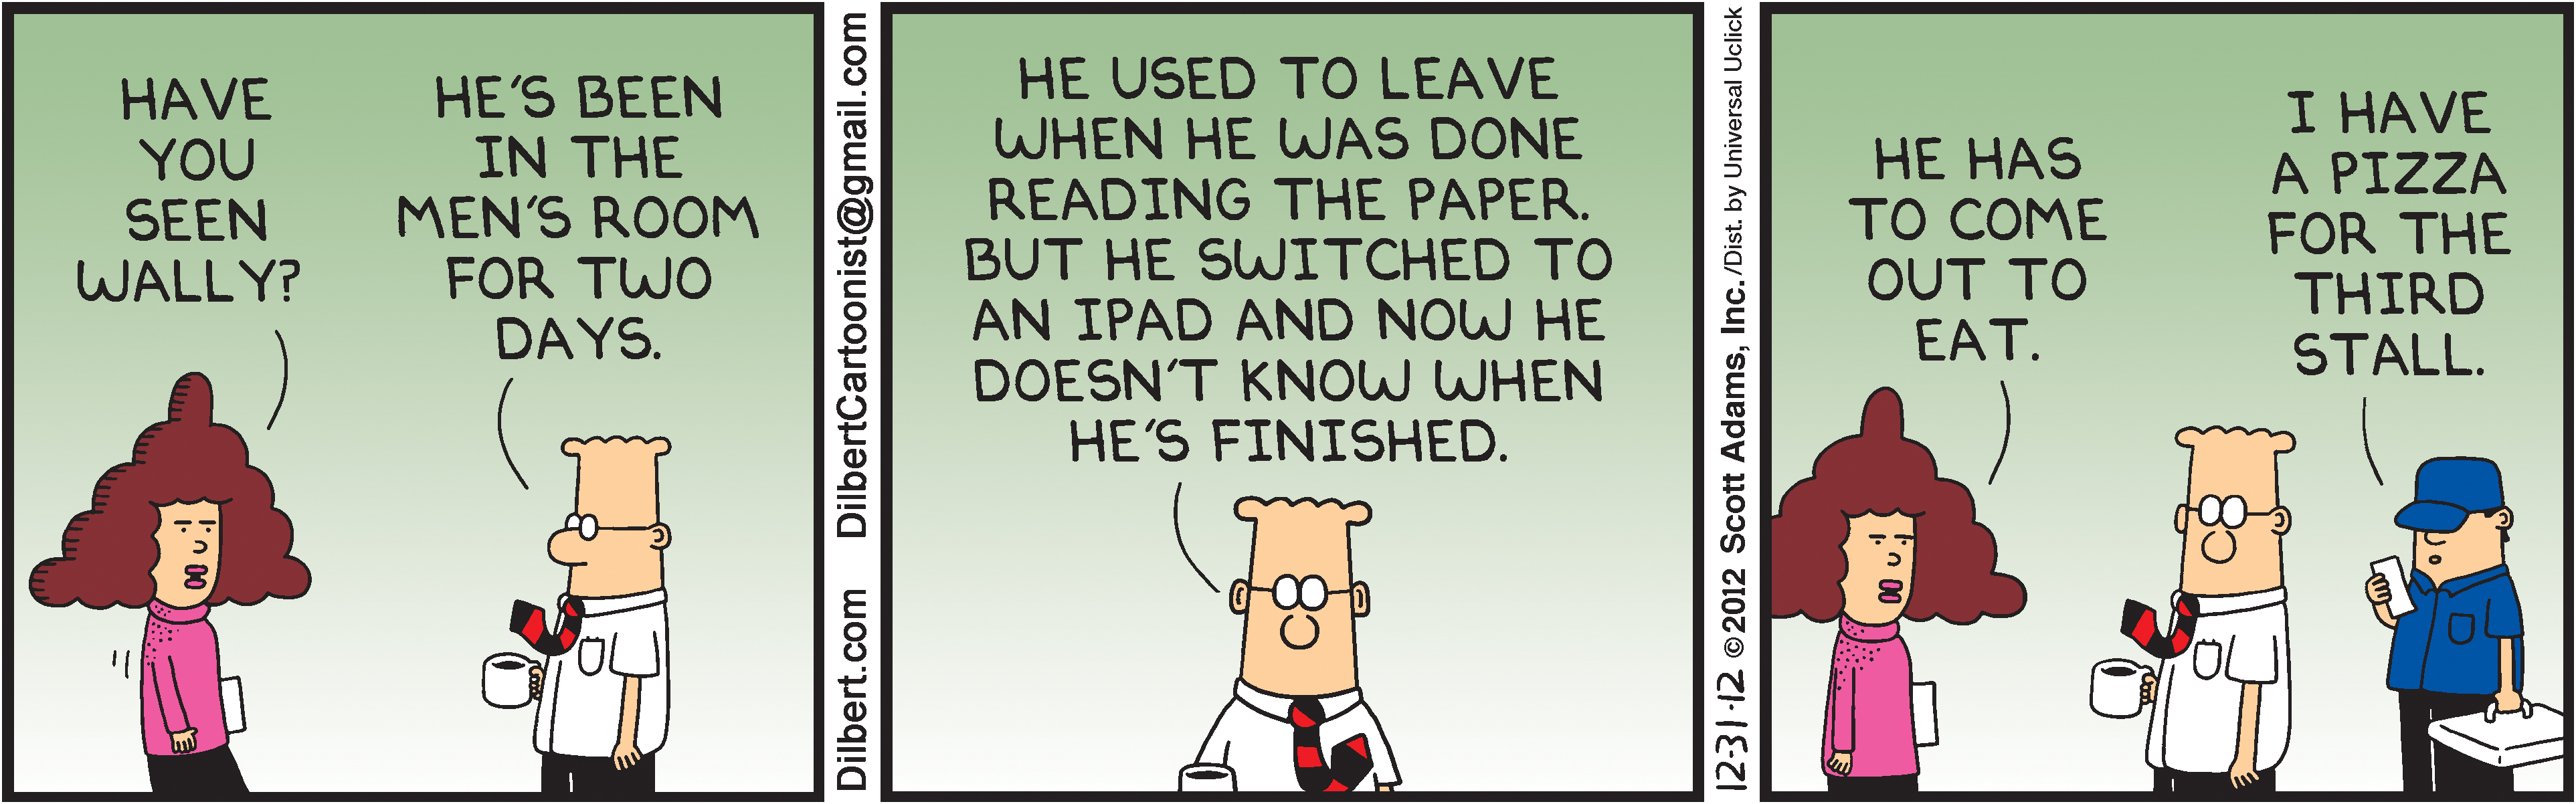 Index of /library/resources/images/Dilbert/2013.